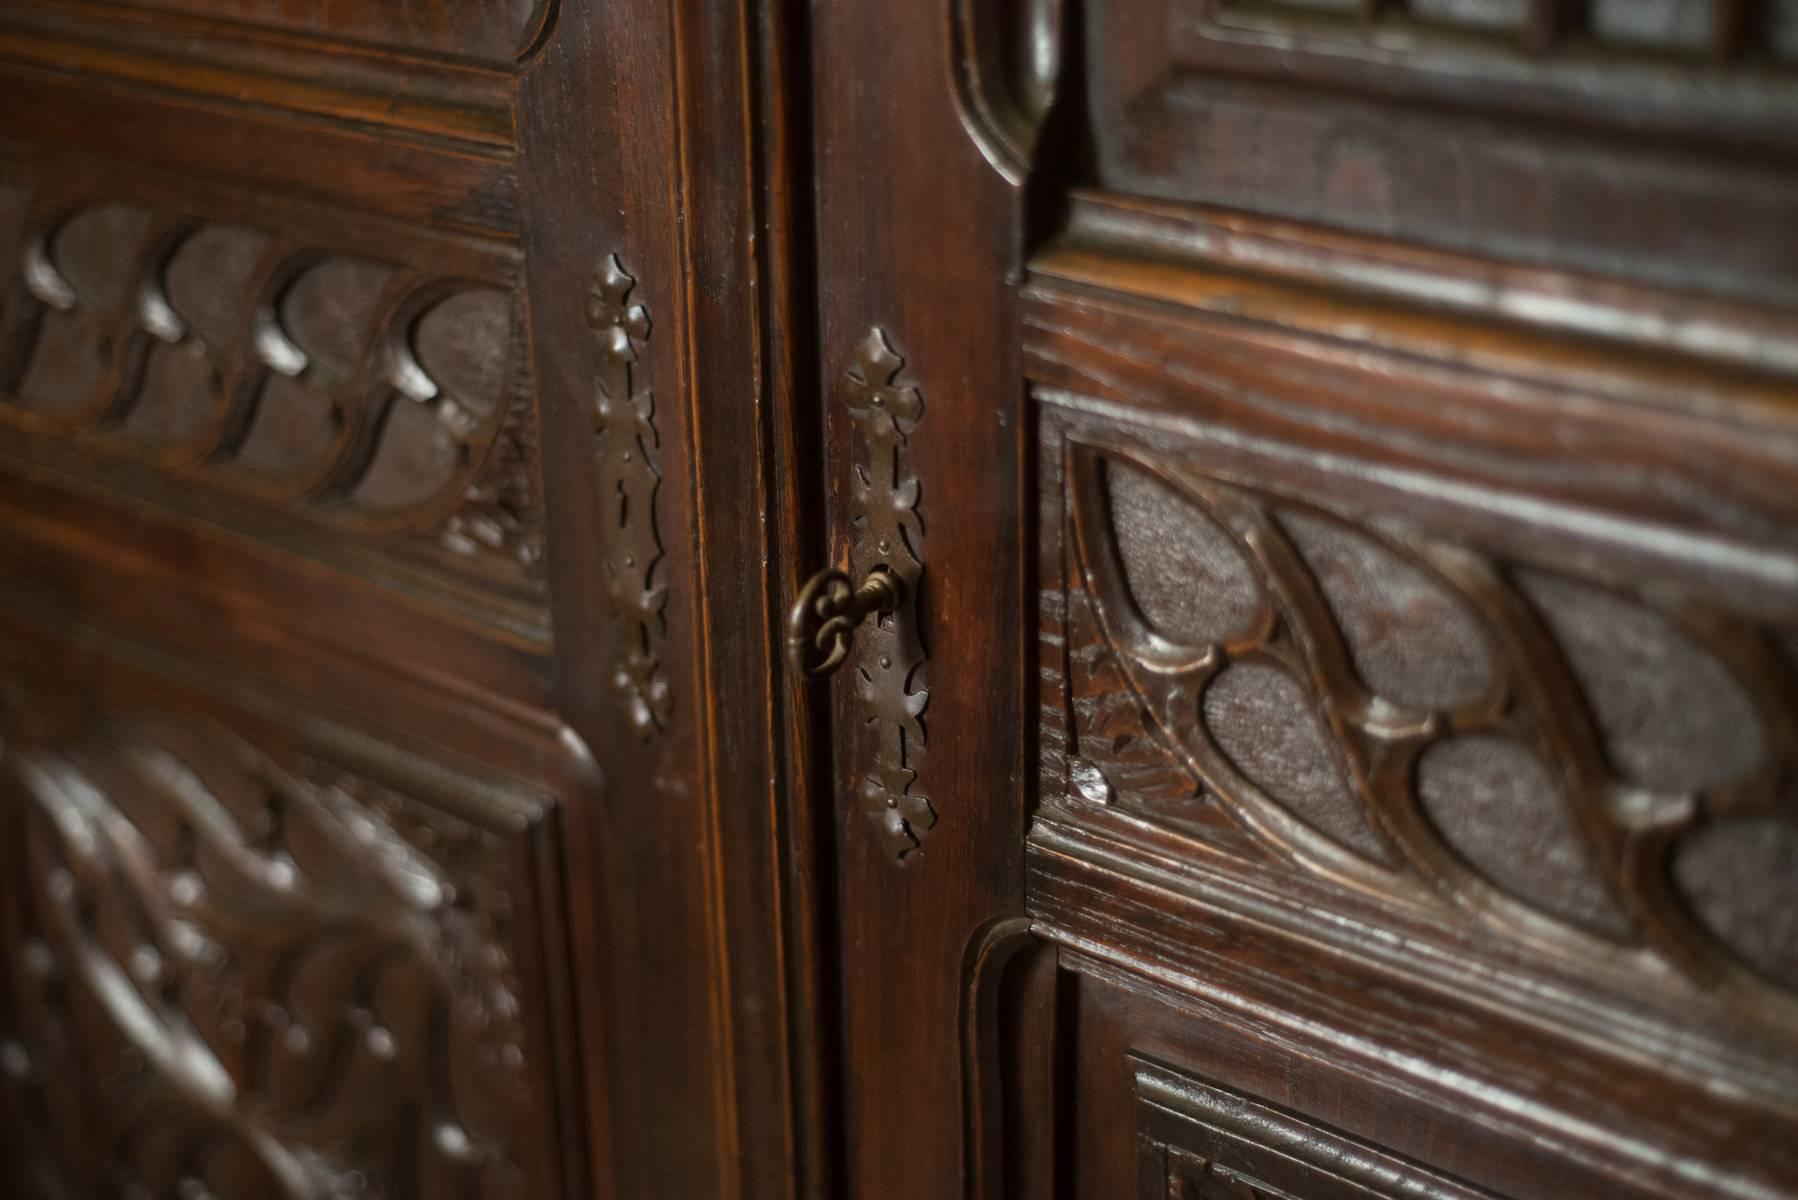 Magnificent chestnut cabinet with intricate Gothic motifs carvings and a gorgeous patina, round carvings on the doors imitate stained-glass windows and scroll work adorn the columns. Interior shelves for ample storage within.
 Breaks down for easy